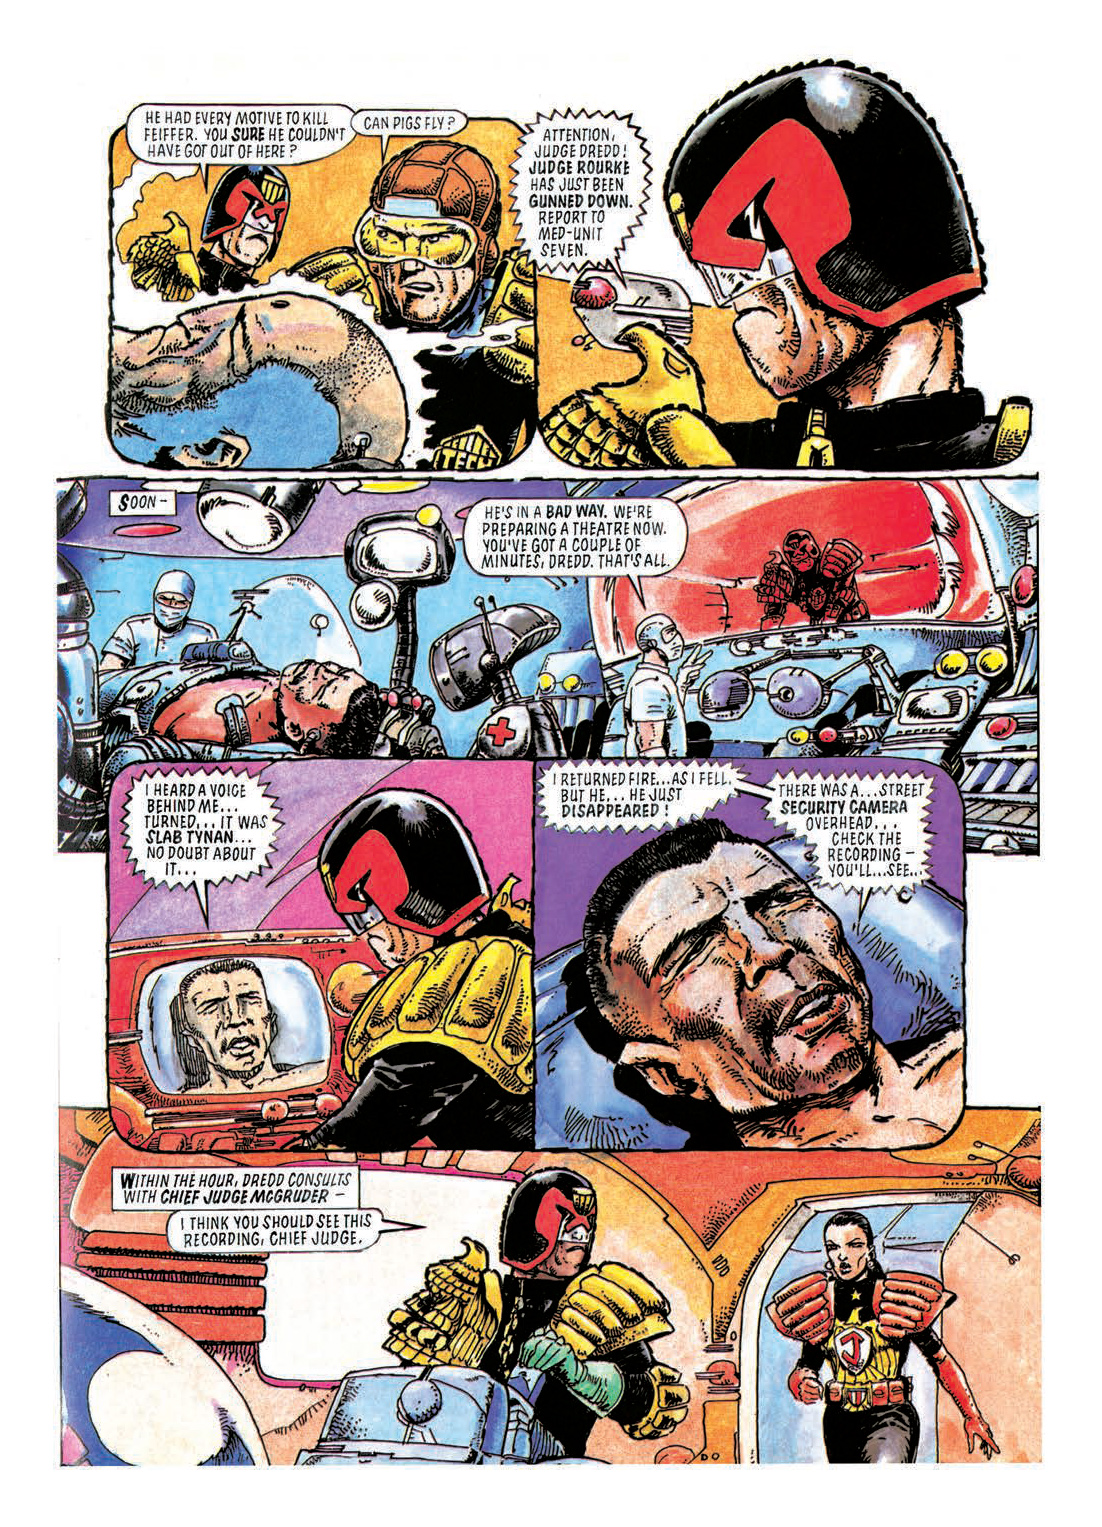 Read online Judge Dredd: The Restricted Files comic -  Issue # TPB 1 - 228